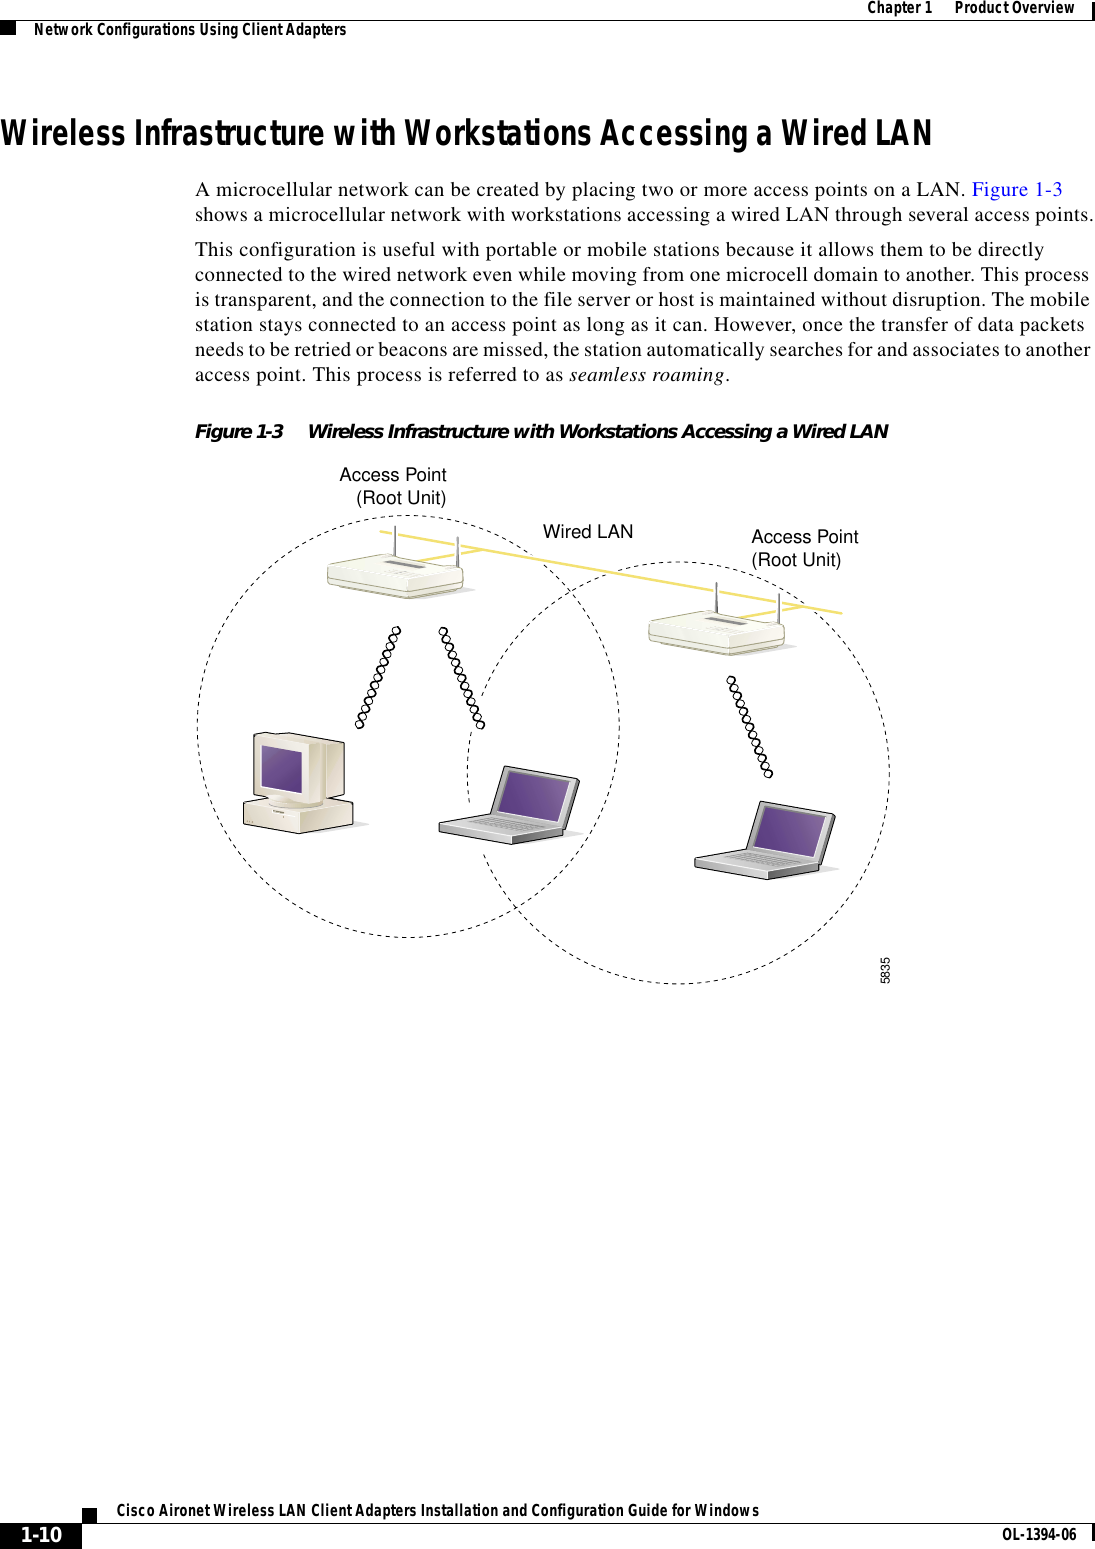 1-10Cisco Aironet Wireless LAN Client Adapters Installation and Configuration Guide for Windows OL-1394-06Chapter 1      Product OverviewNetwork Configurations Using Client AdaptersWireless Infrastructure with Workstations Accessing a Wired LANA microcellular network can be created by placing two or more access points on a LAN. Figure 1-3shows a microcellular network with workstations accessing a wired LAN through several access points.This configuration is useful with portable or mobile stations because it allows them to be directly connected to the wired network even while moving from one microcell domain to another. This process is transparent, and the connection to the file server or host is maintained without disruption. The mobile station stays connected to an access point as long as it can. However, once the transfer of data packets needs to be retried or beacons are missed, the station automatically searches for and associates to another access point. This process is referred to as seamless roaming.Figure 1-3 Wireless Infrastructure with Workstations Accessing a Wired LANAccess Point(Root Unit)Access Point(Root Unit)5835Wired LAN